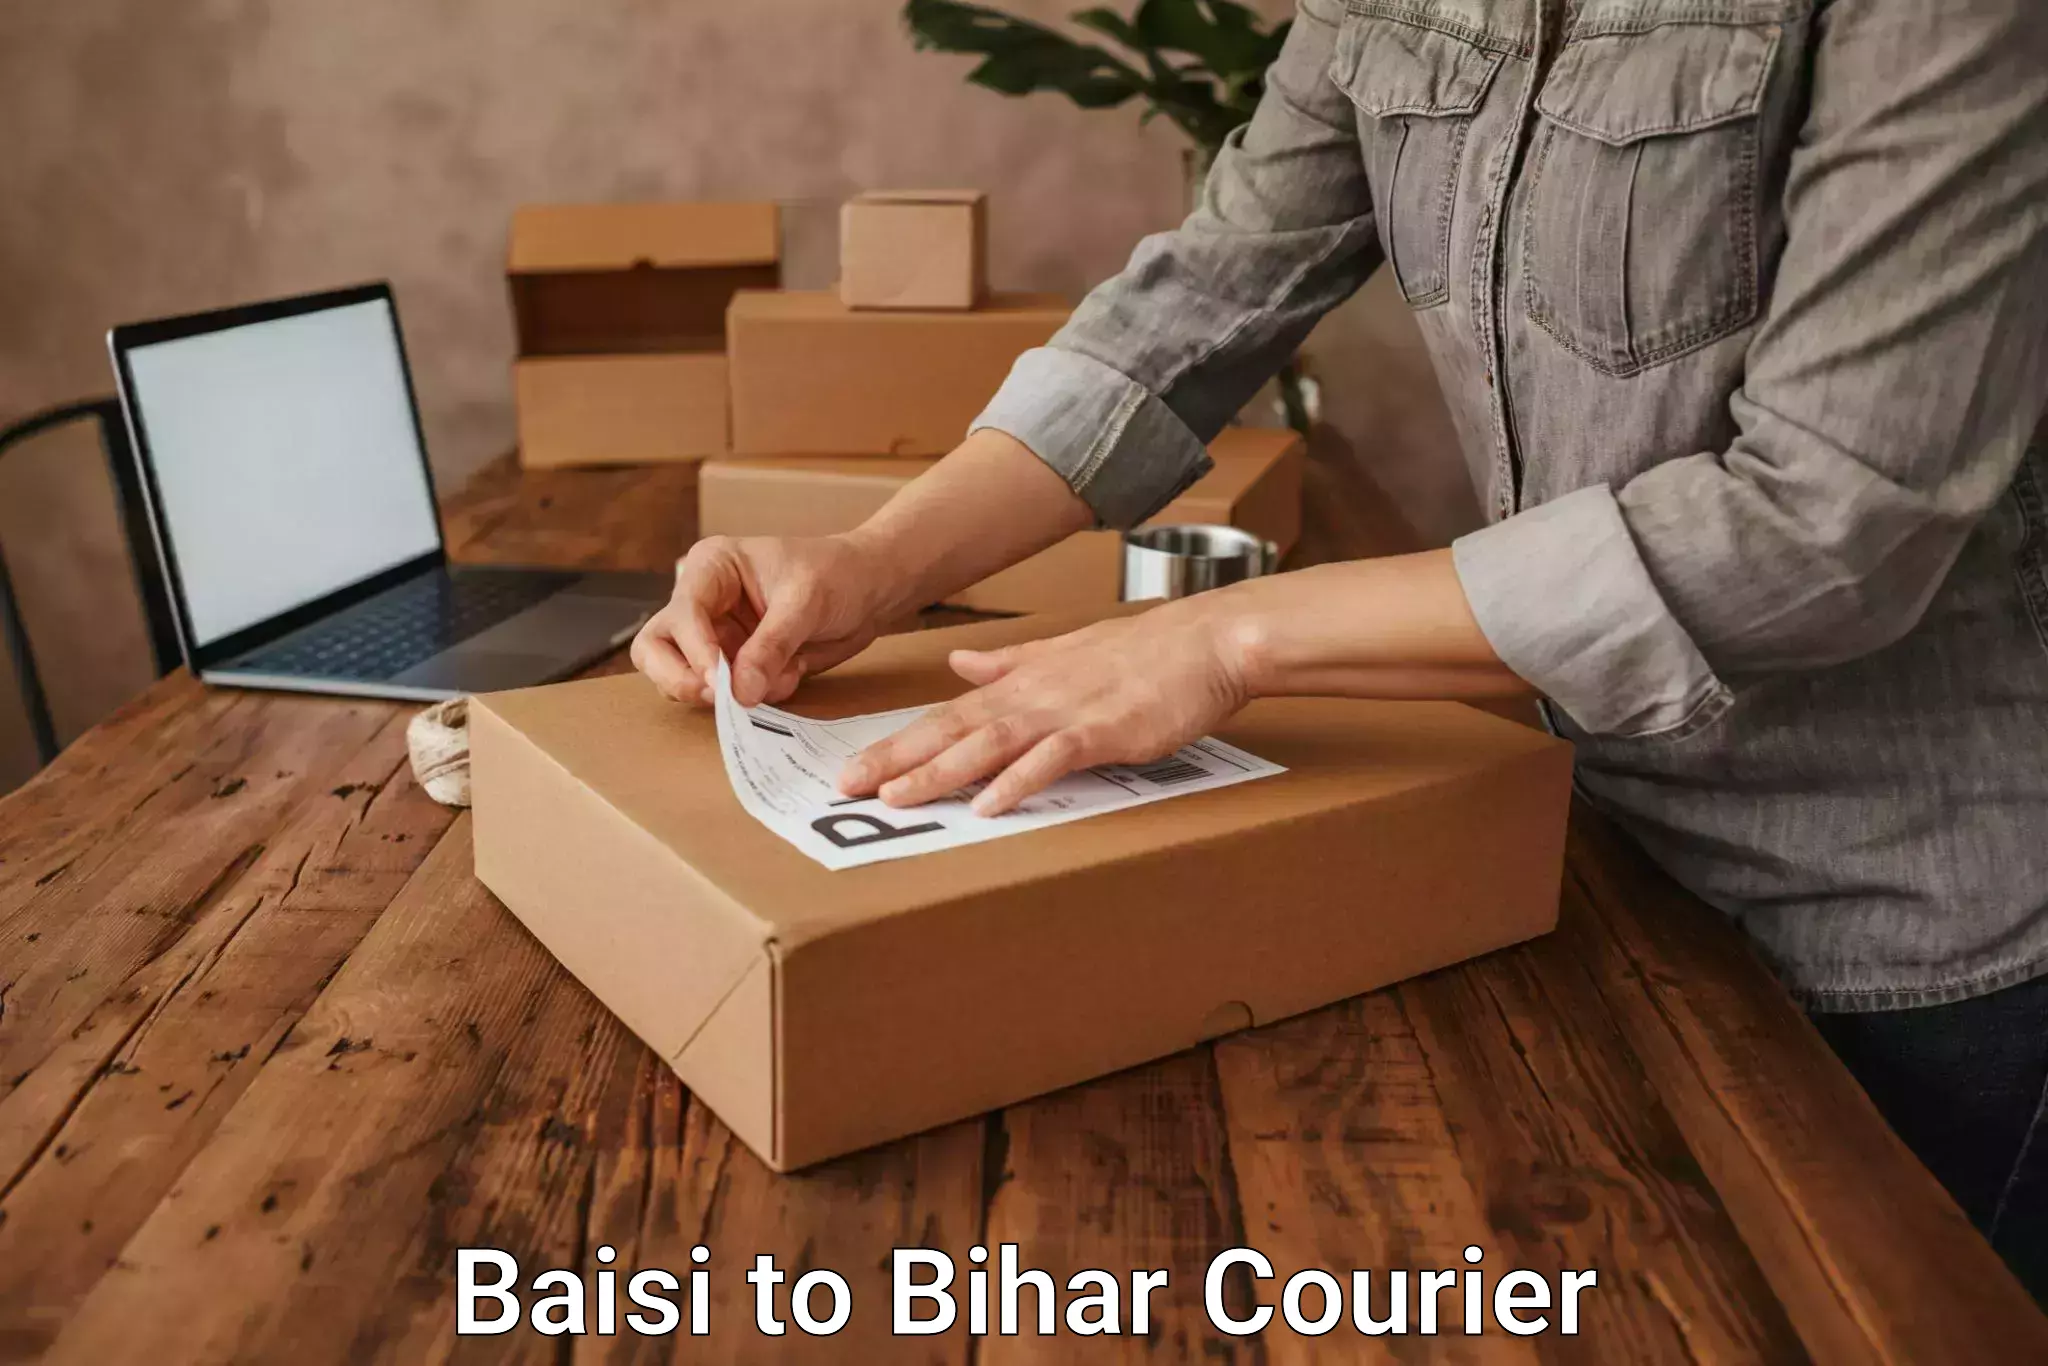 Professional moving company in Baisi to Bihar